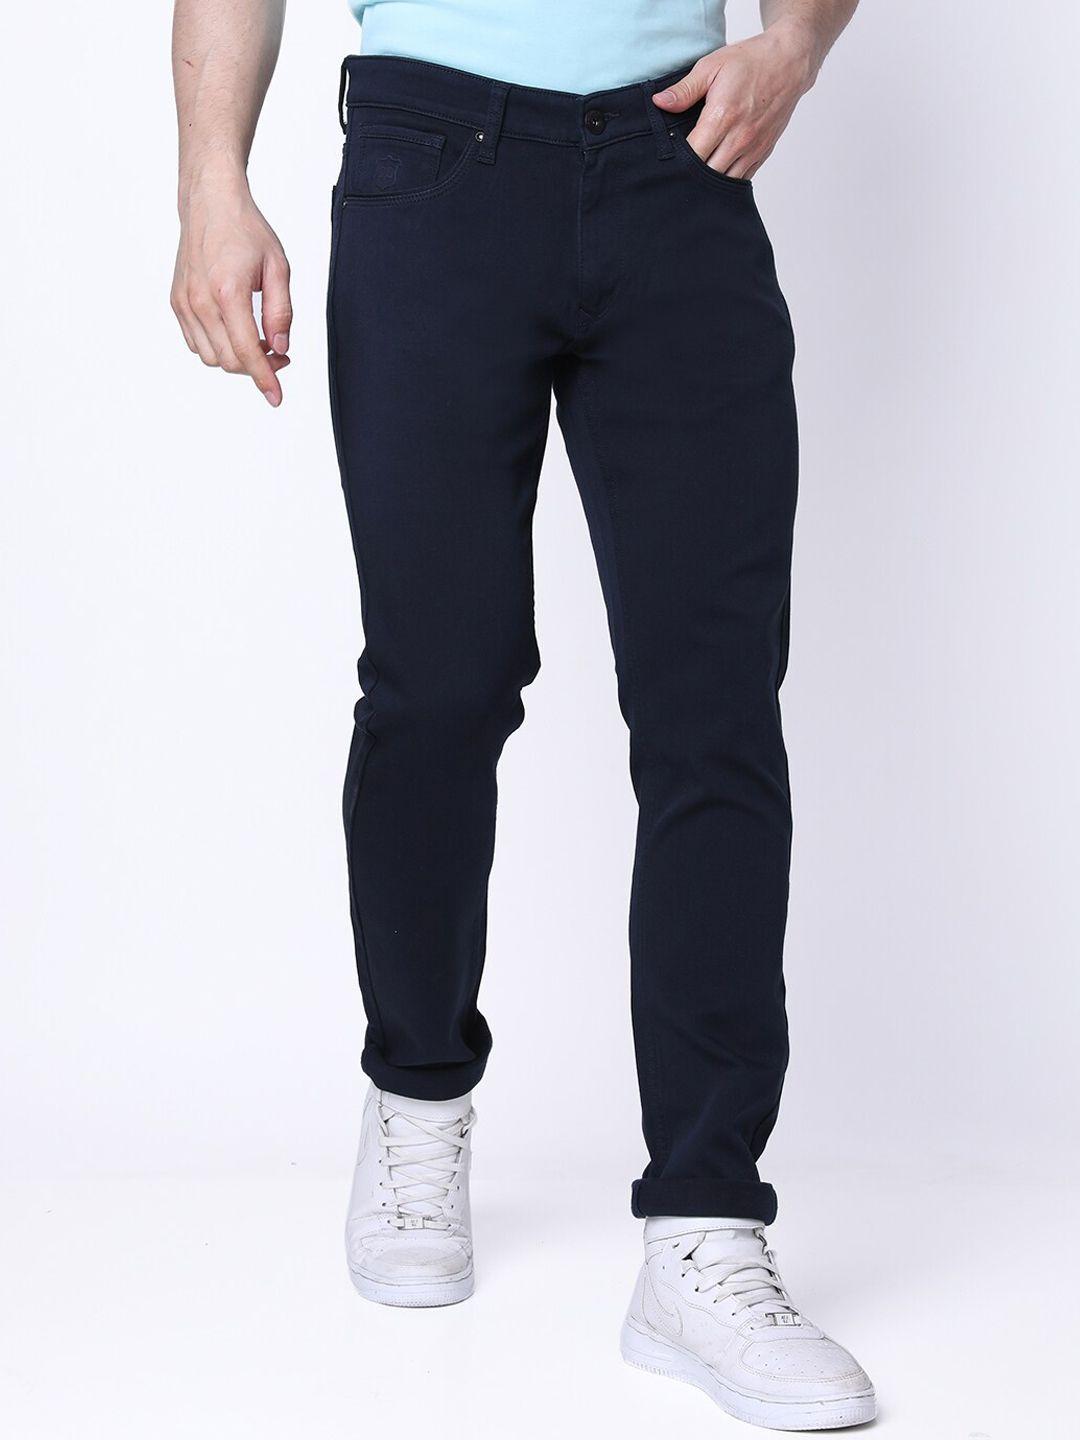 oxemberg-lean-men-slim-fit-mid-rise-clean-look-stretchable-jeans